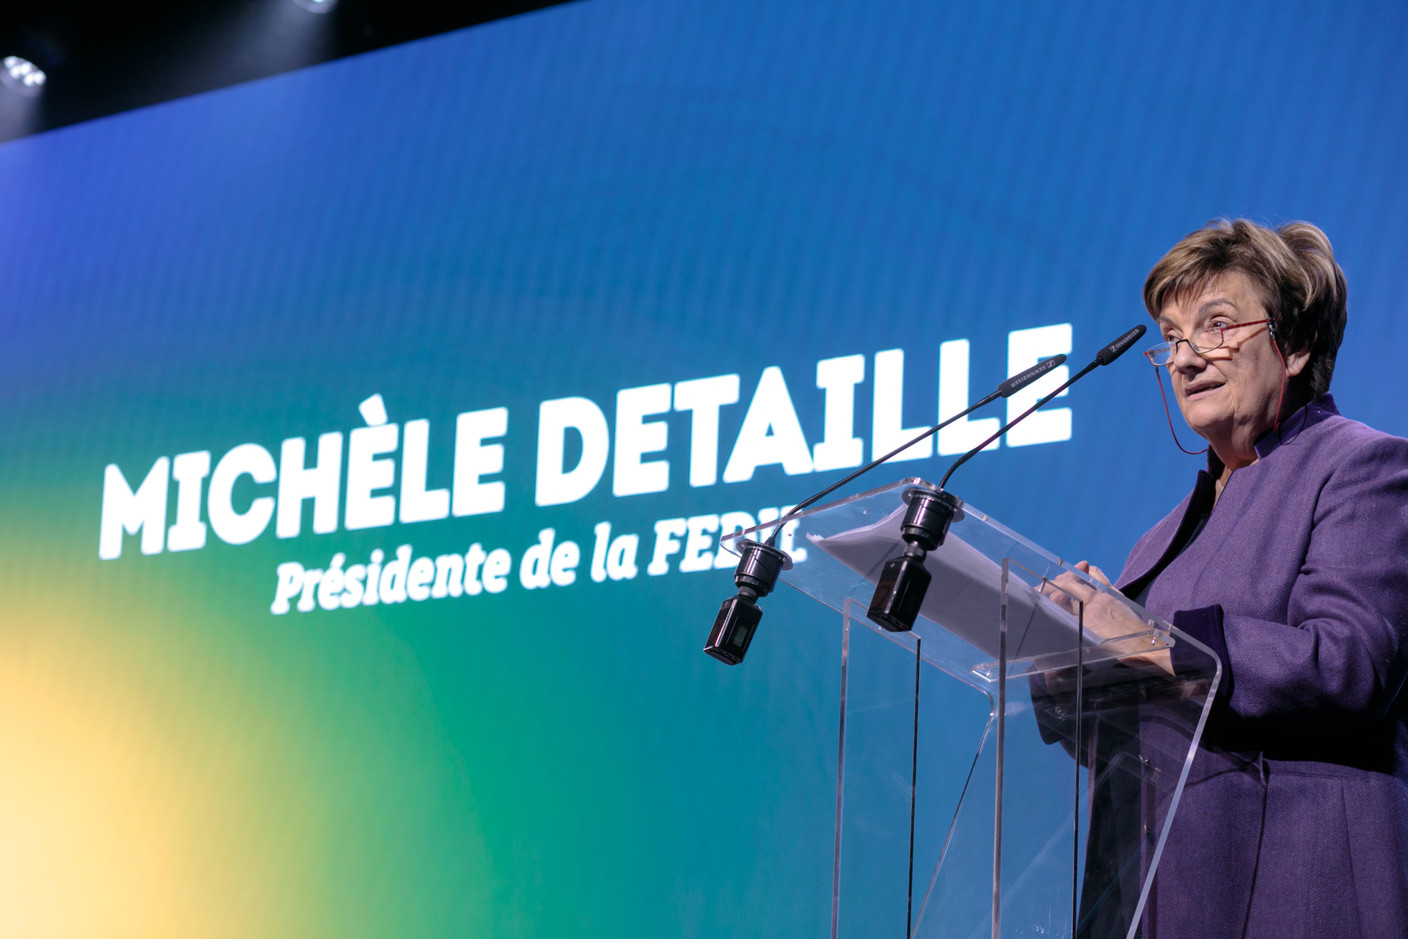 For Michèle Detaille, President of Fedil, the solution to the crises faced by companies will either be European or not. (Photo: Matic Zorman/Maison Moderne)